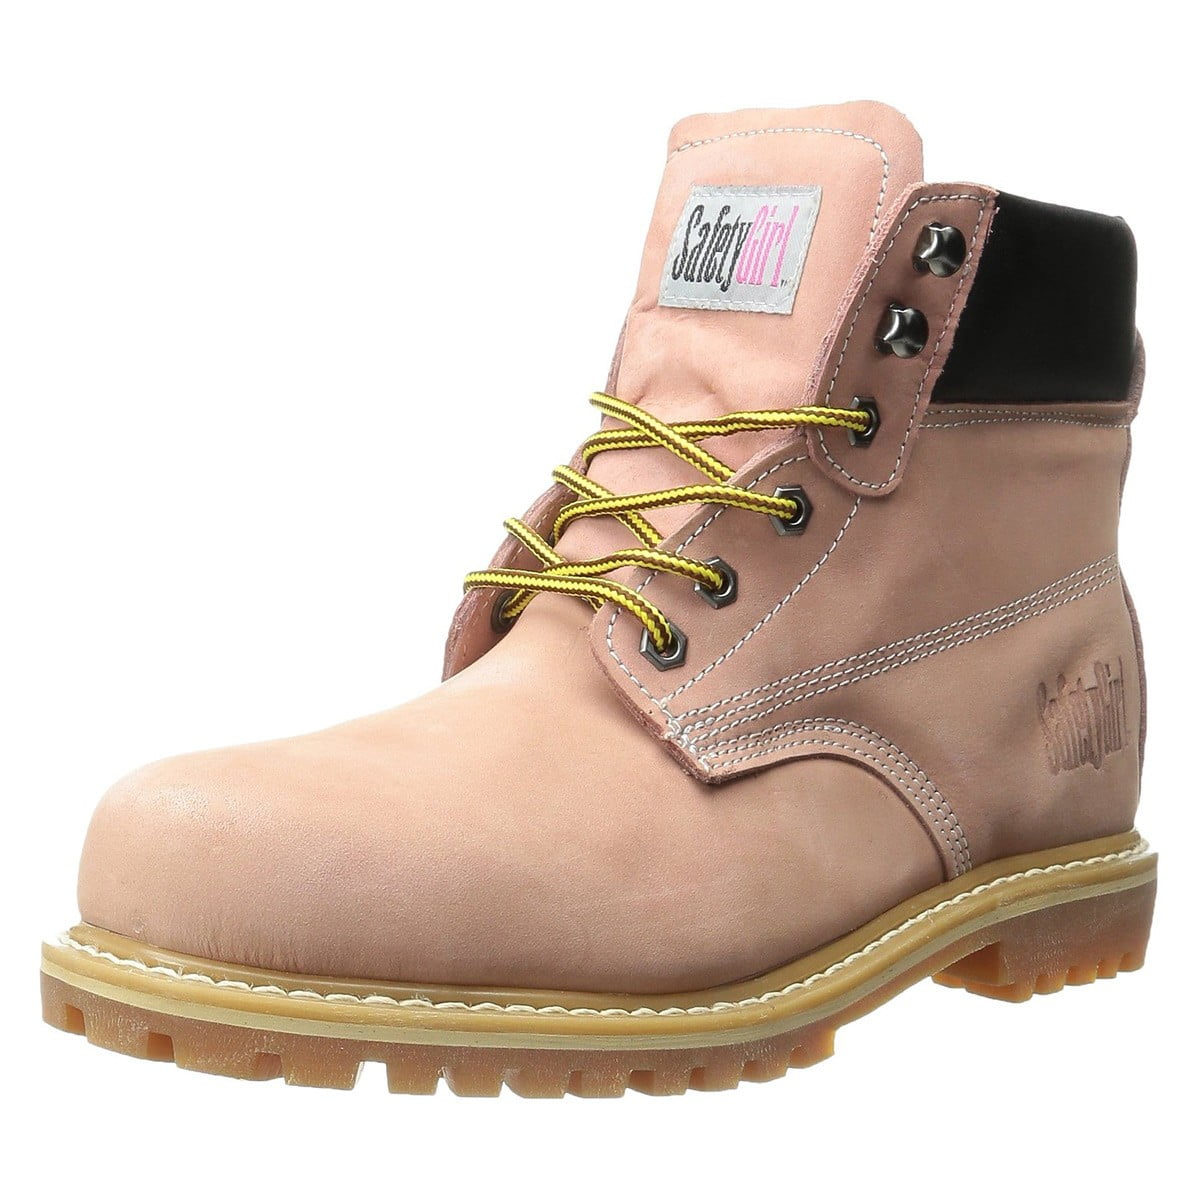 Light Pink Online Stores GS003-Lt Pink-11.5M Safety Girl Steel Toe Work Boots 